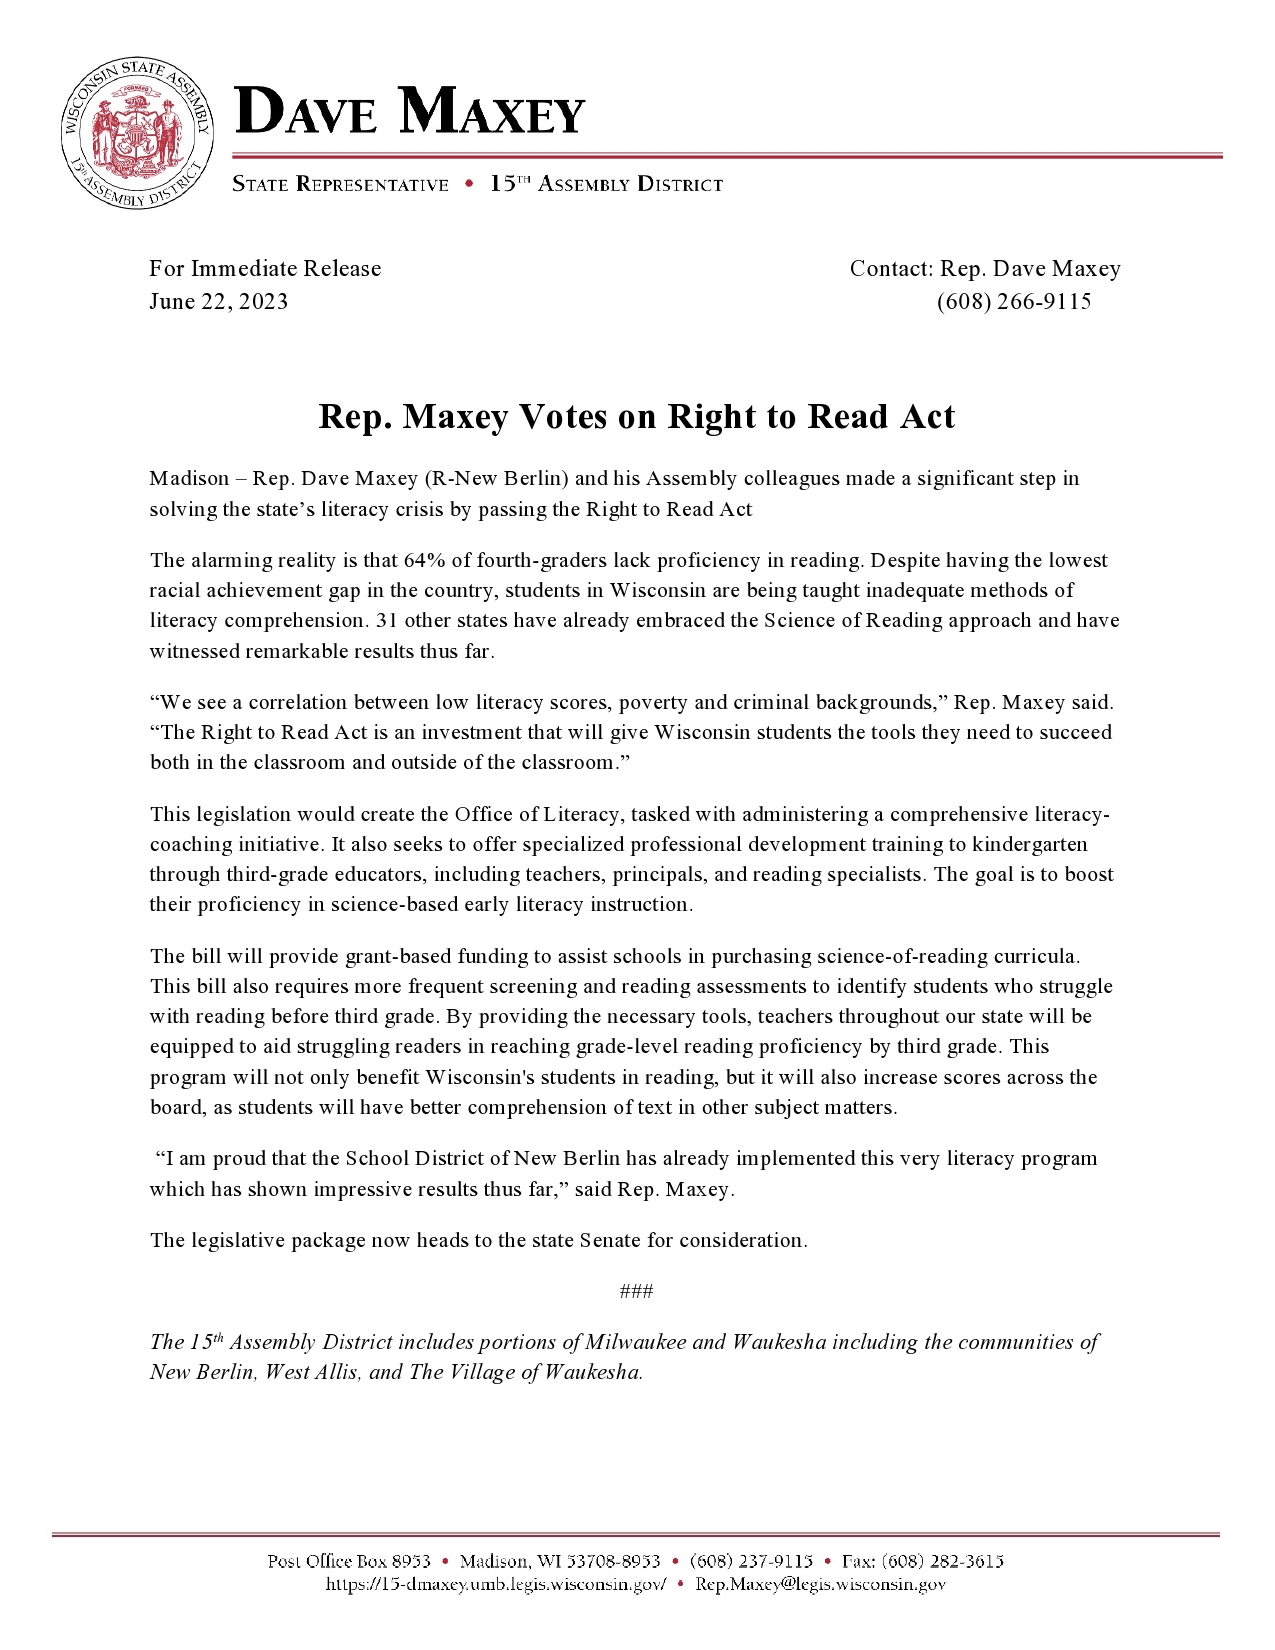 Rep Maxey Votes on Right to Read Act